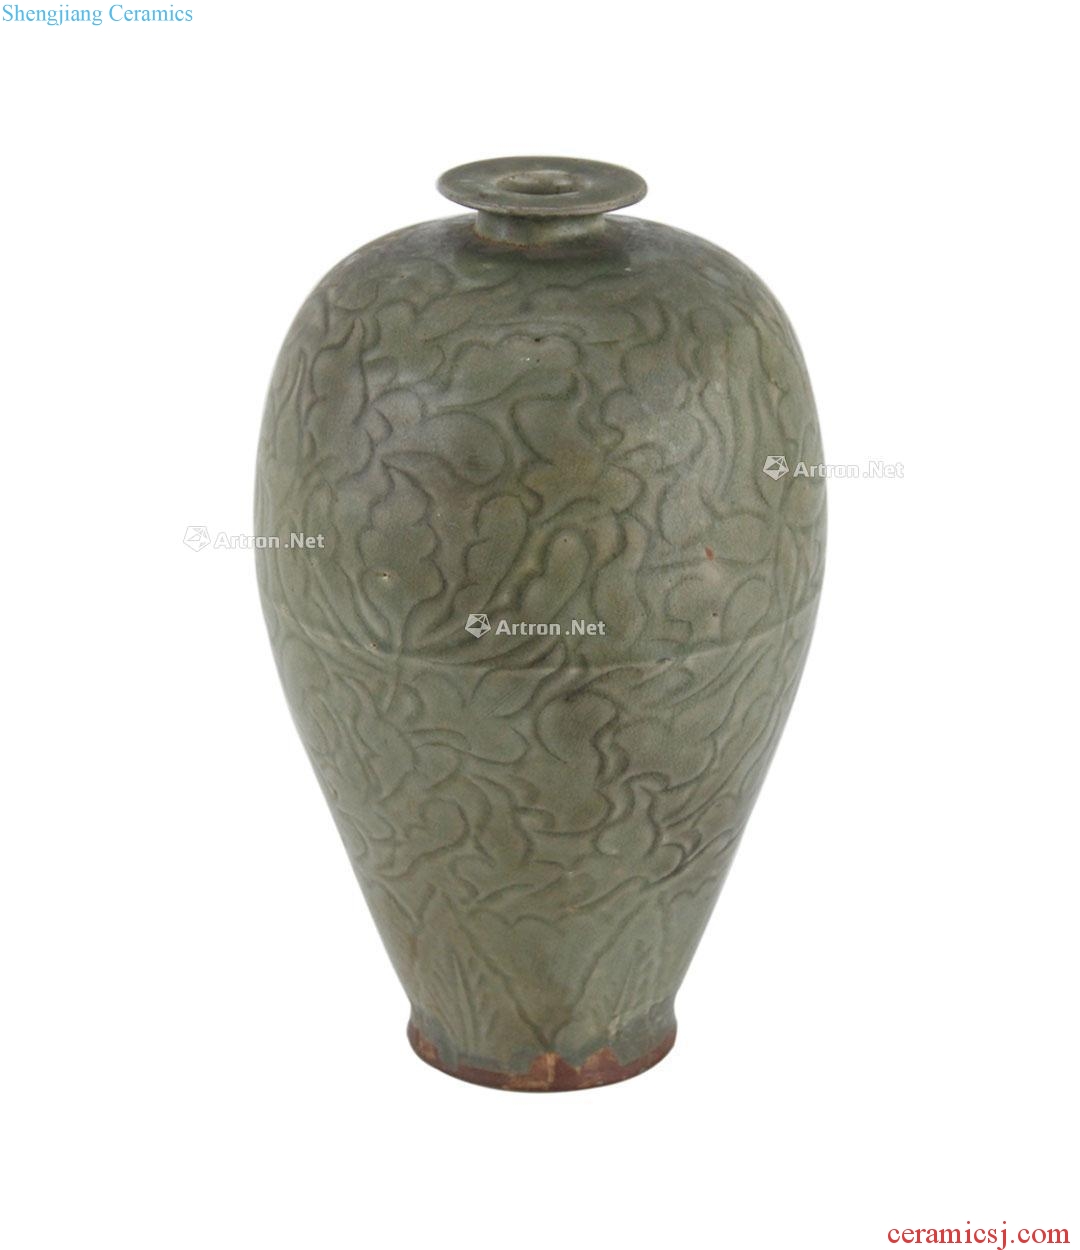 The song dynasty Yao state kiln celadon carved plum bottle